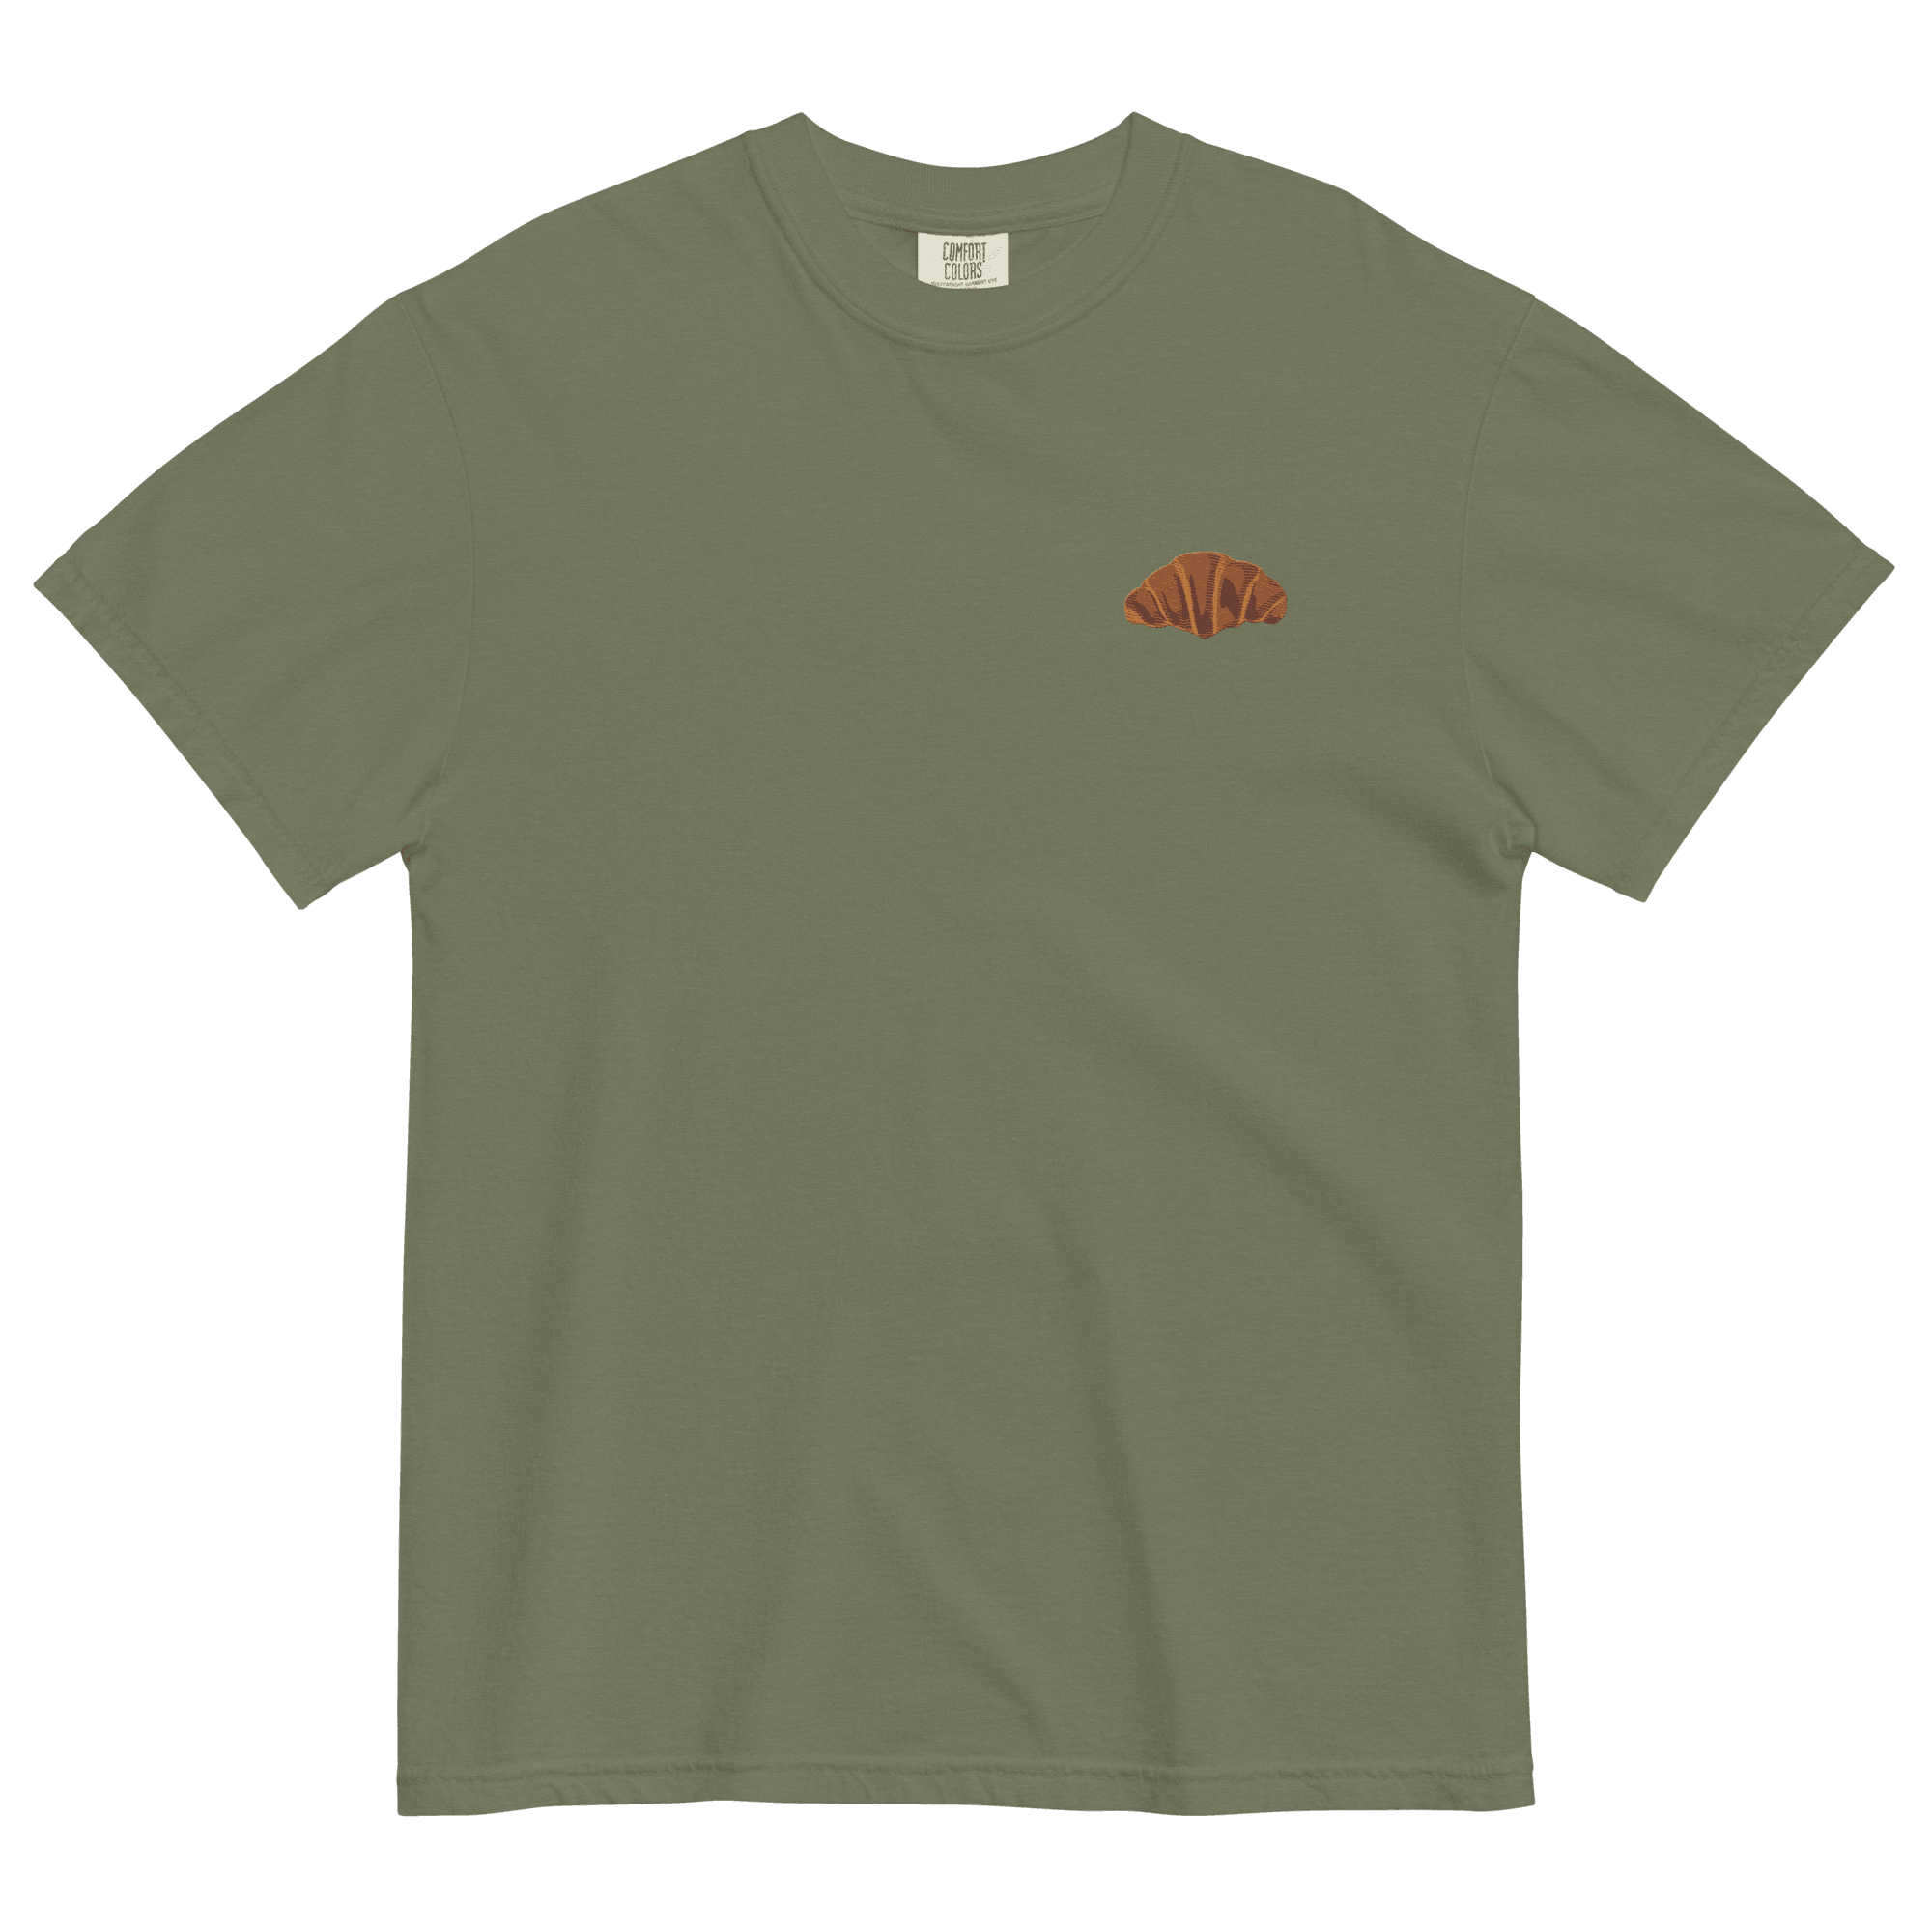 Croissant 🥐 Embroidered T-Shirt - Polychrome Goods 🍊